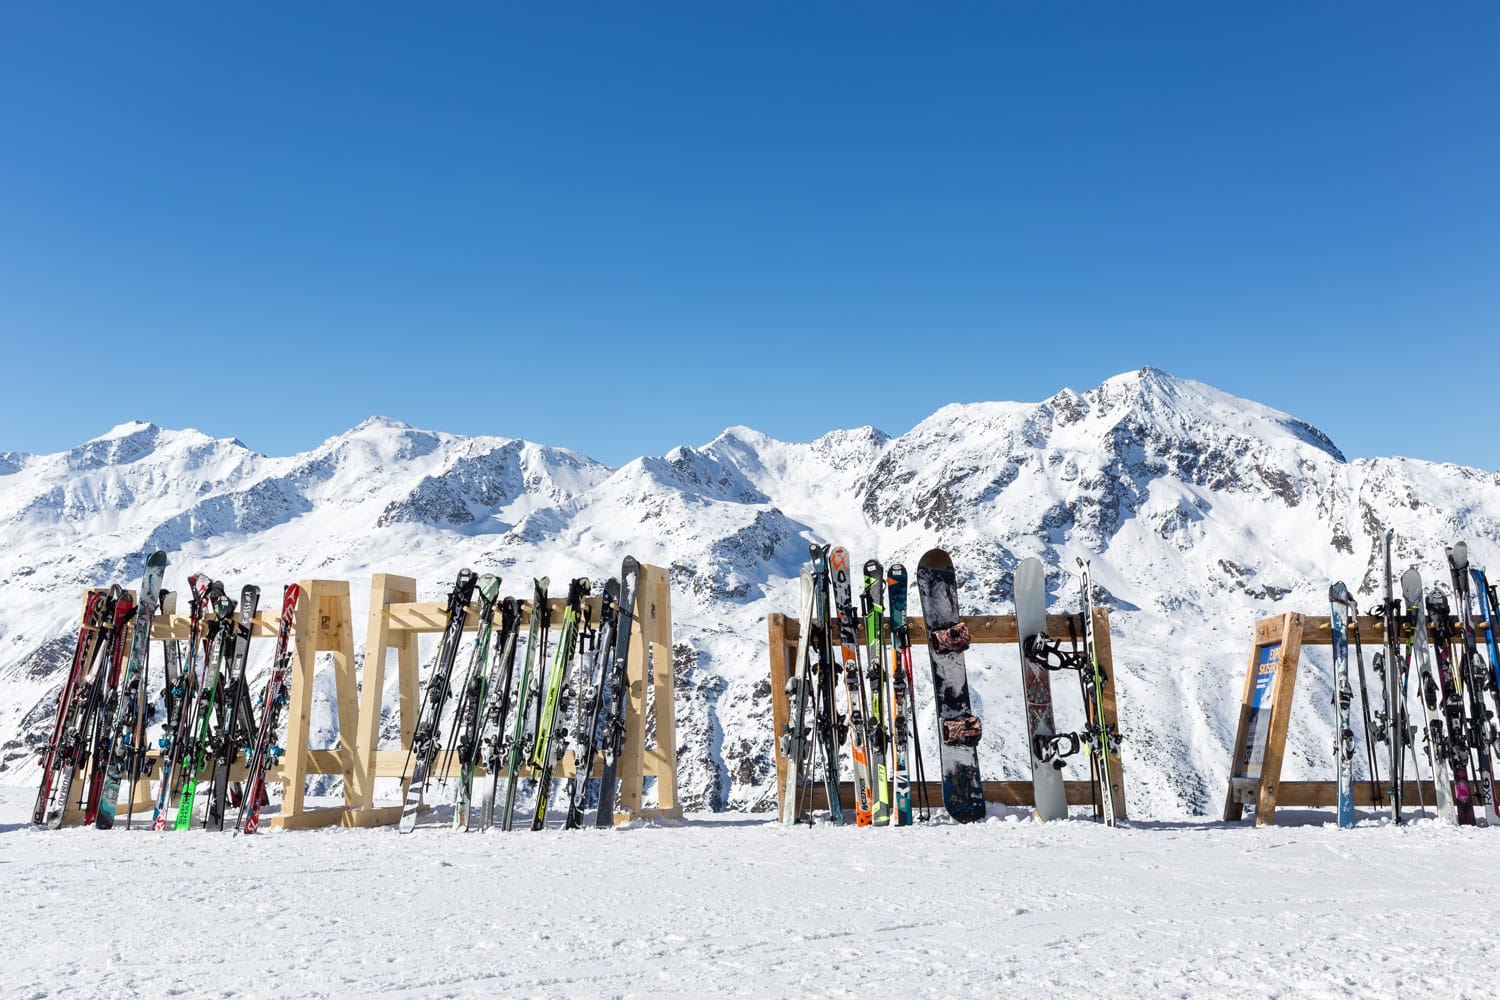 A line of skis and snowboards stored on racks outside a cafe on the slopes at Hochgurgl with the Otztal Alps in the background.